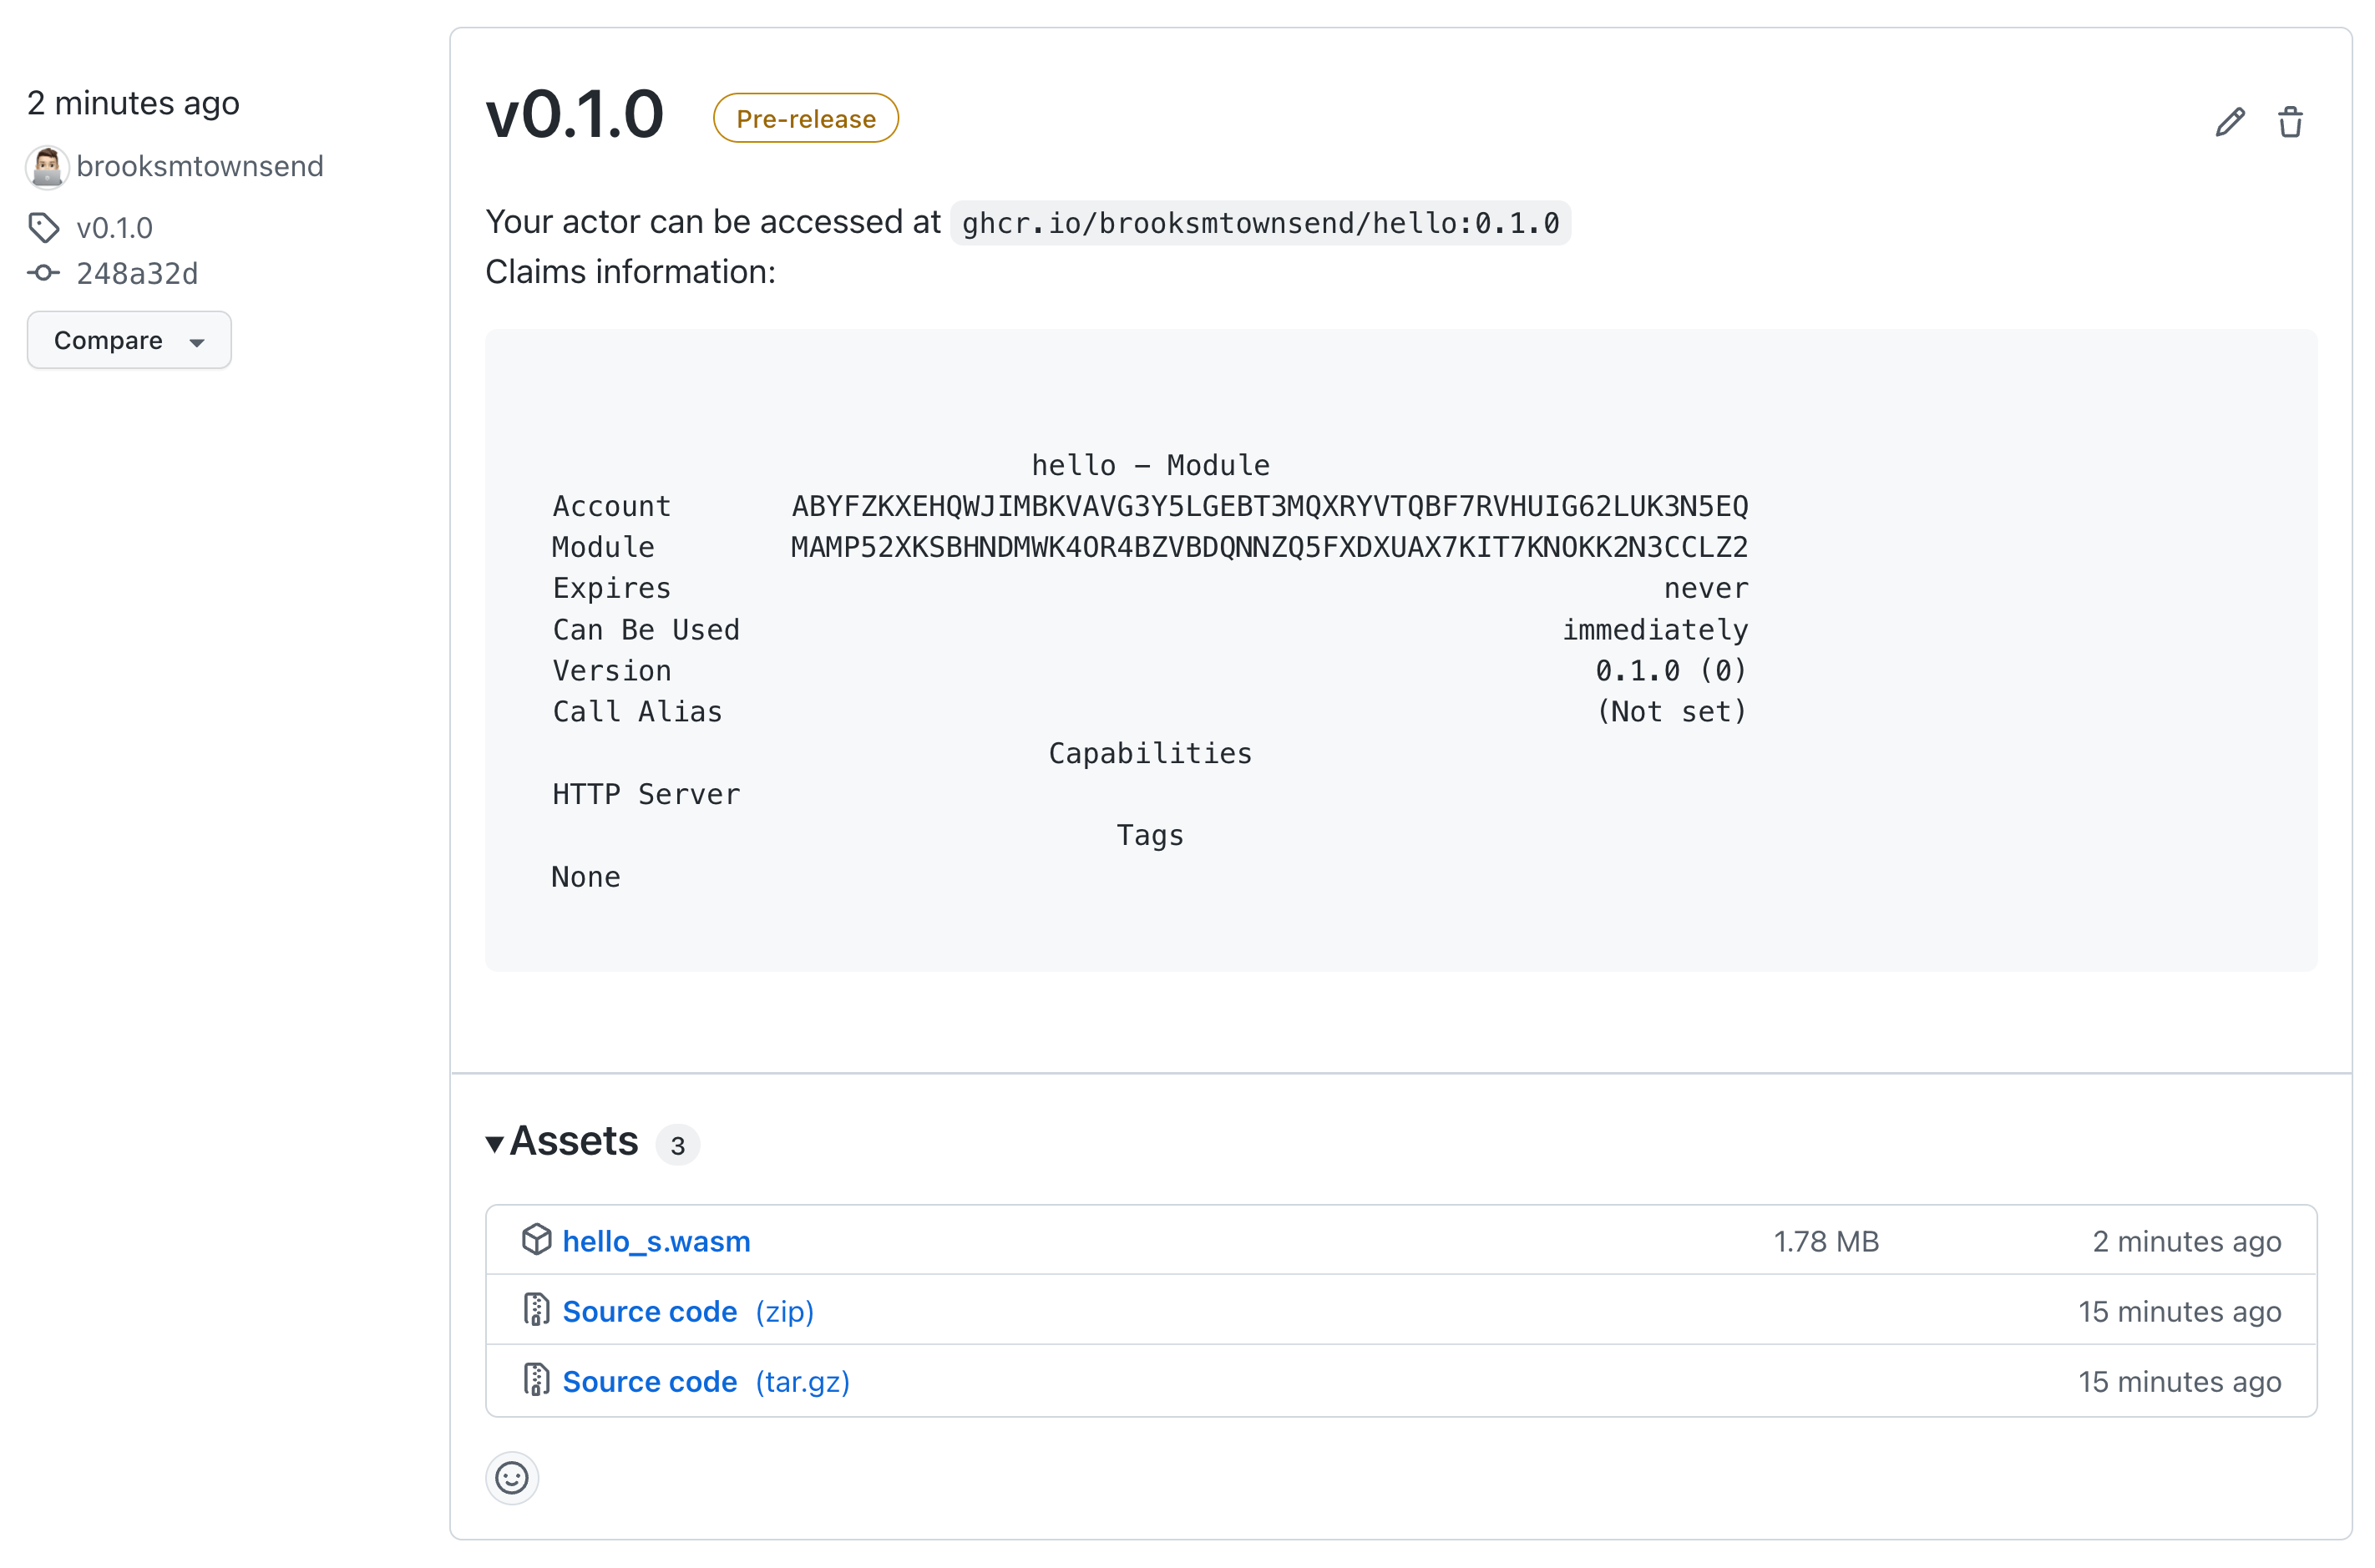 release 0.1.0